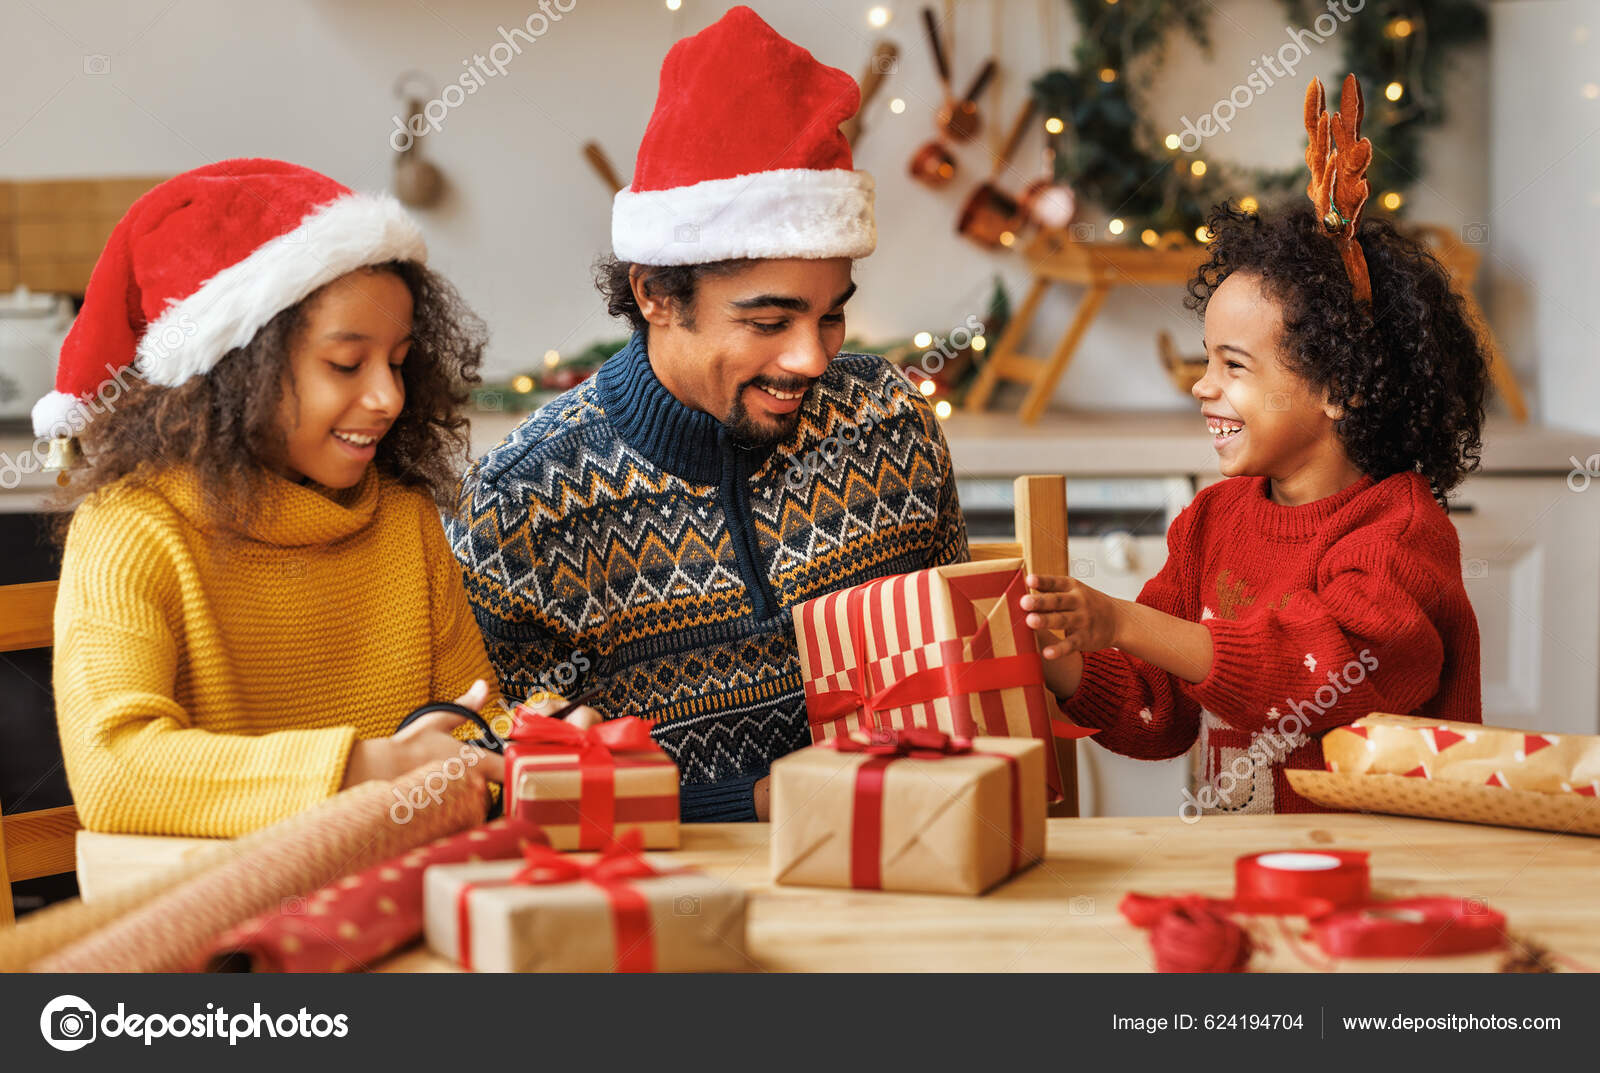 Gifts For Family With Kids